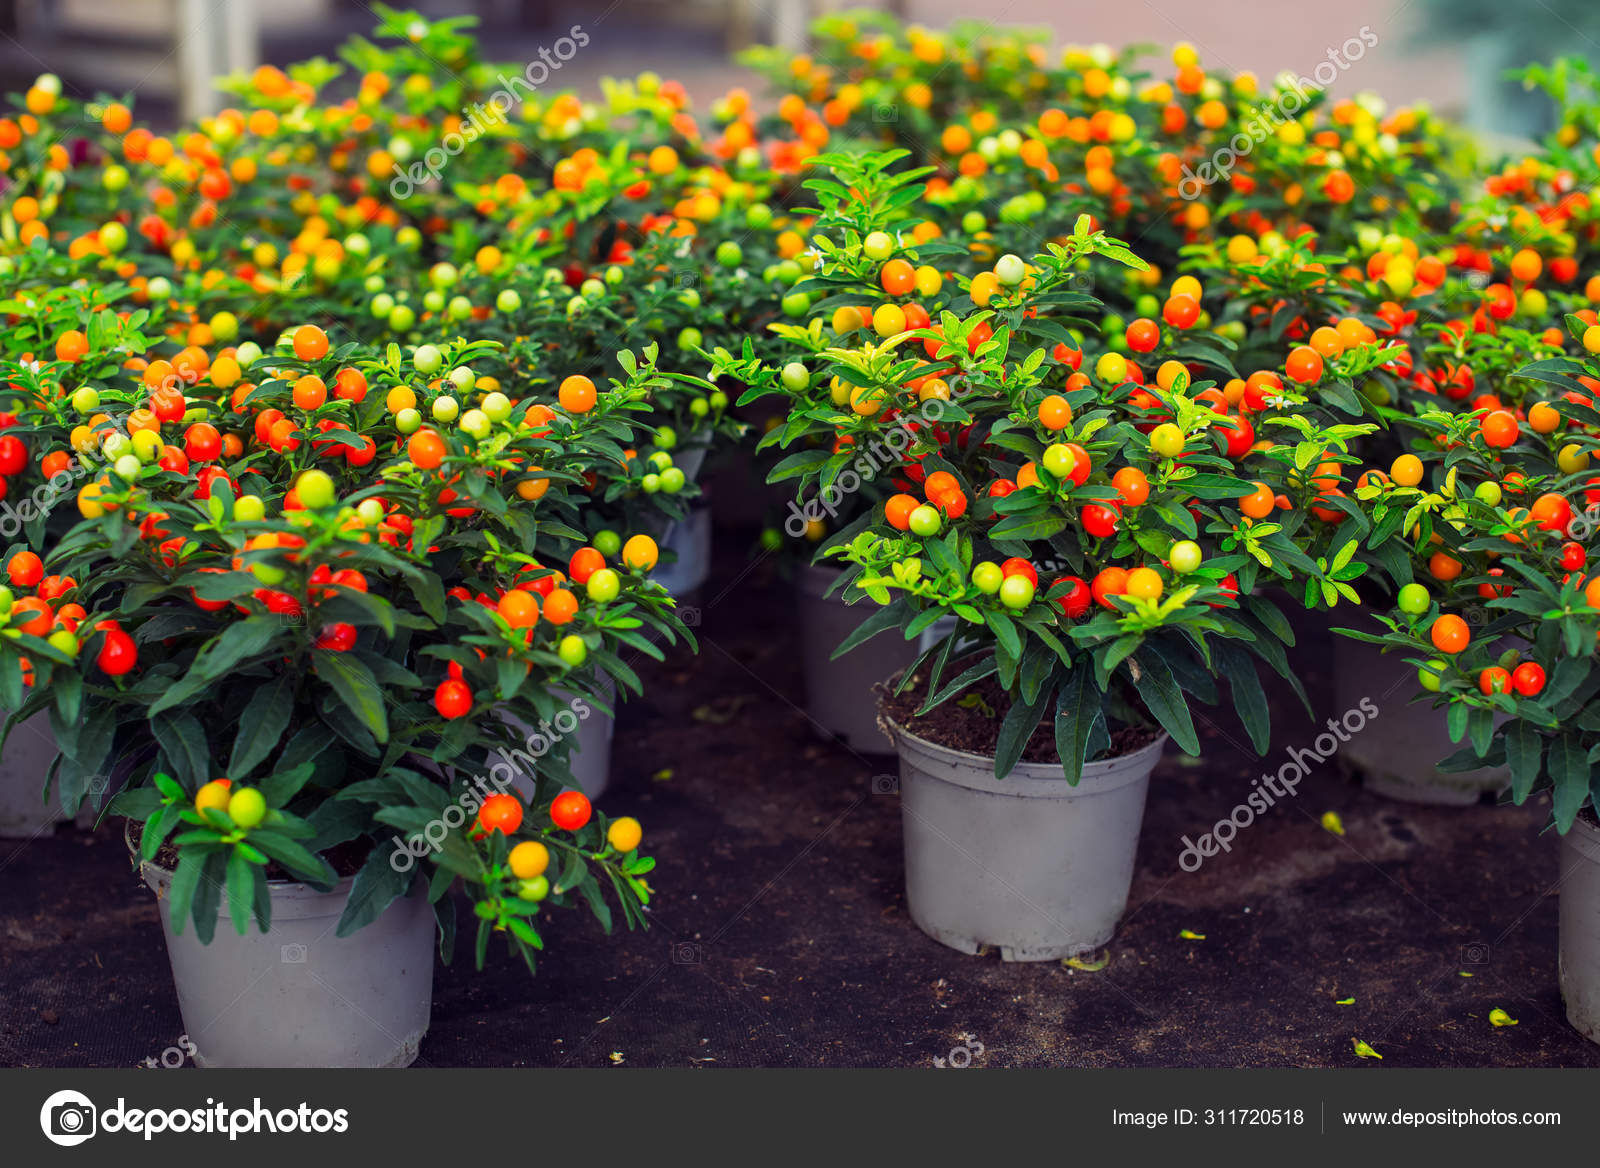 Potted Winter Cherry Plants Or Jerusalem Cherry Solanum Pseudocapsicum Ornamental Plant For Christmas At A Garden Centre Nightshade With Red And Green Fruits Coral Shrub Selected Focus Stock Photo By C Okrasyuk